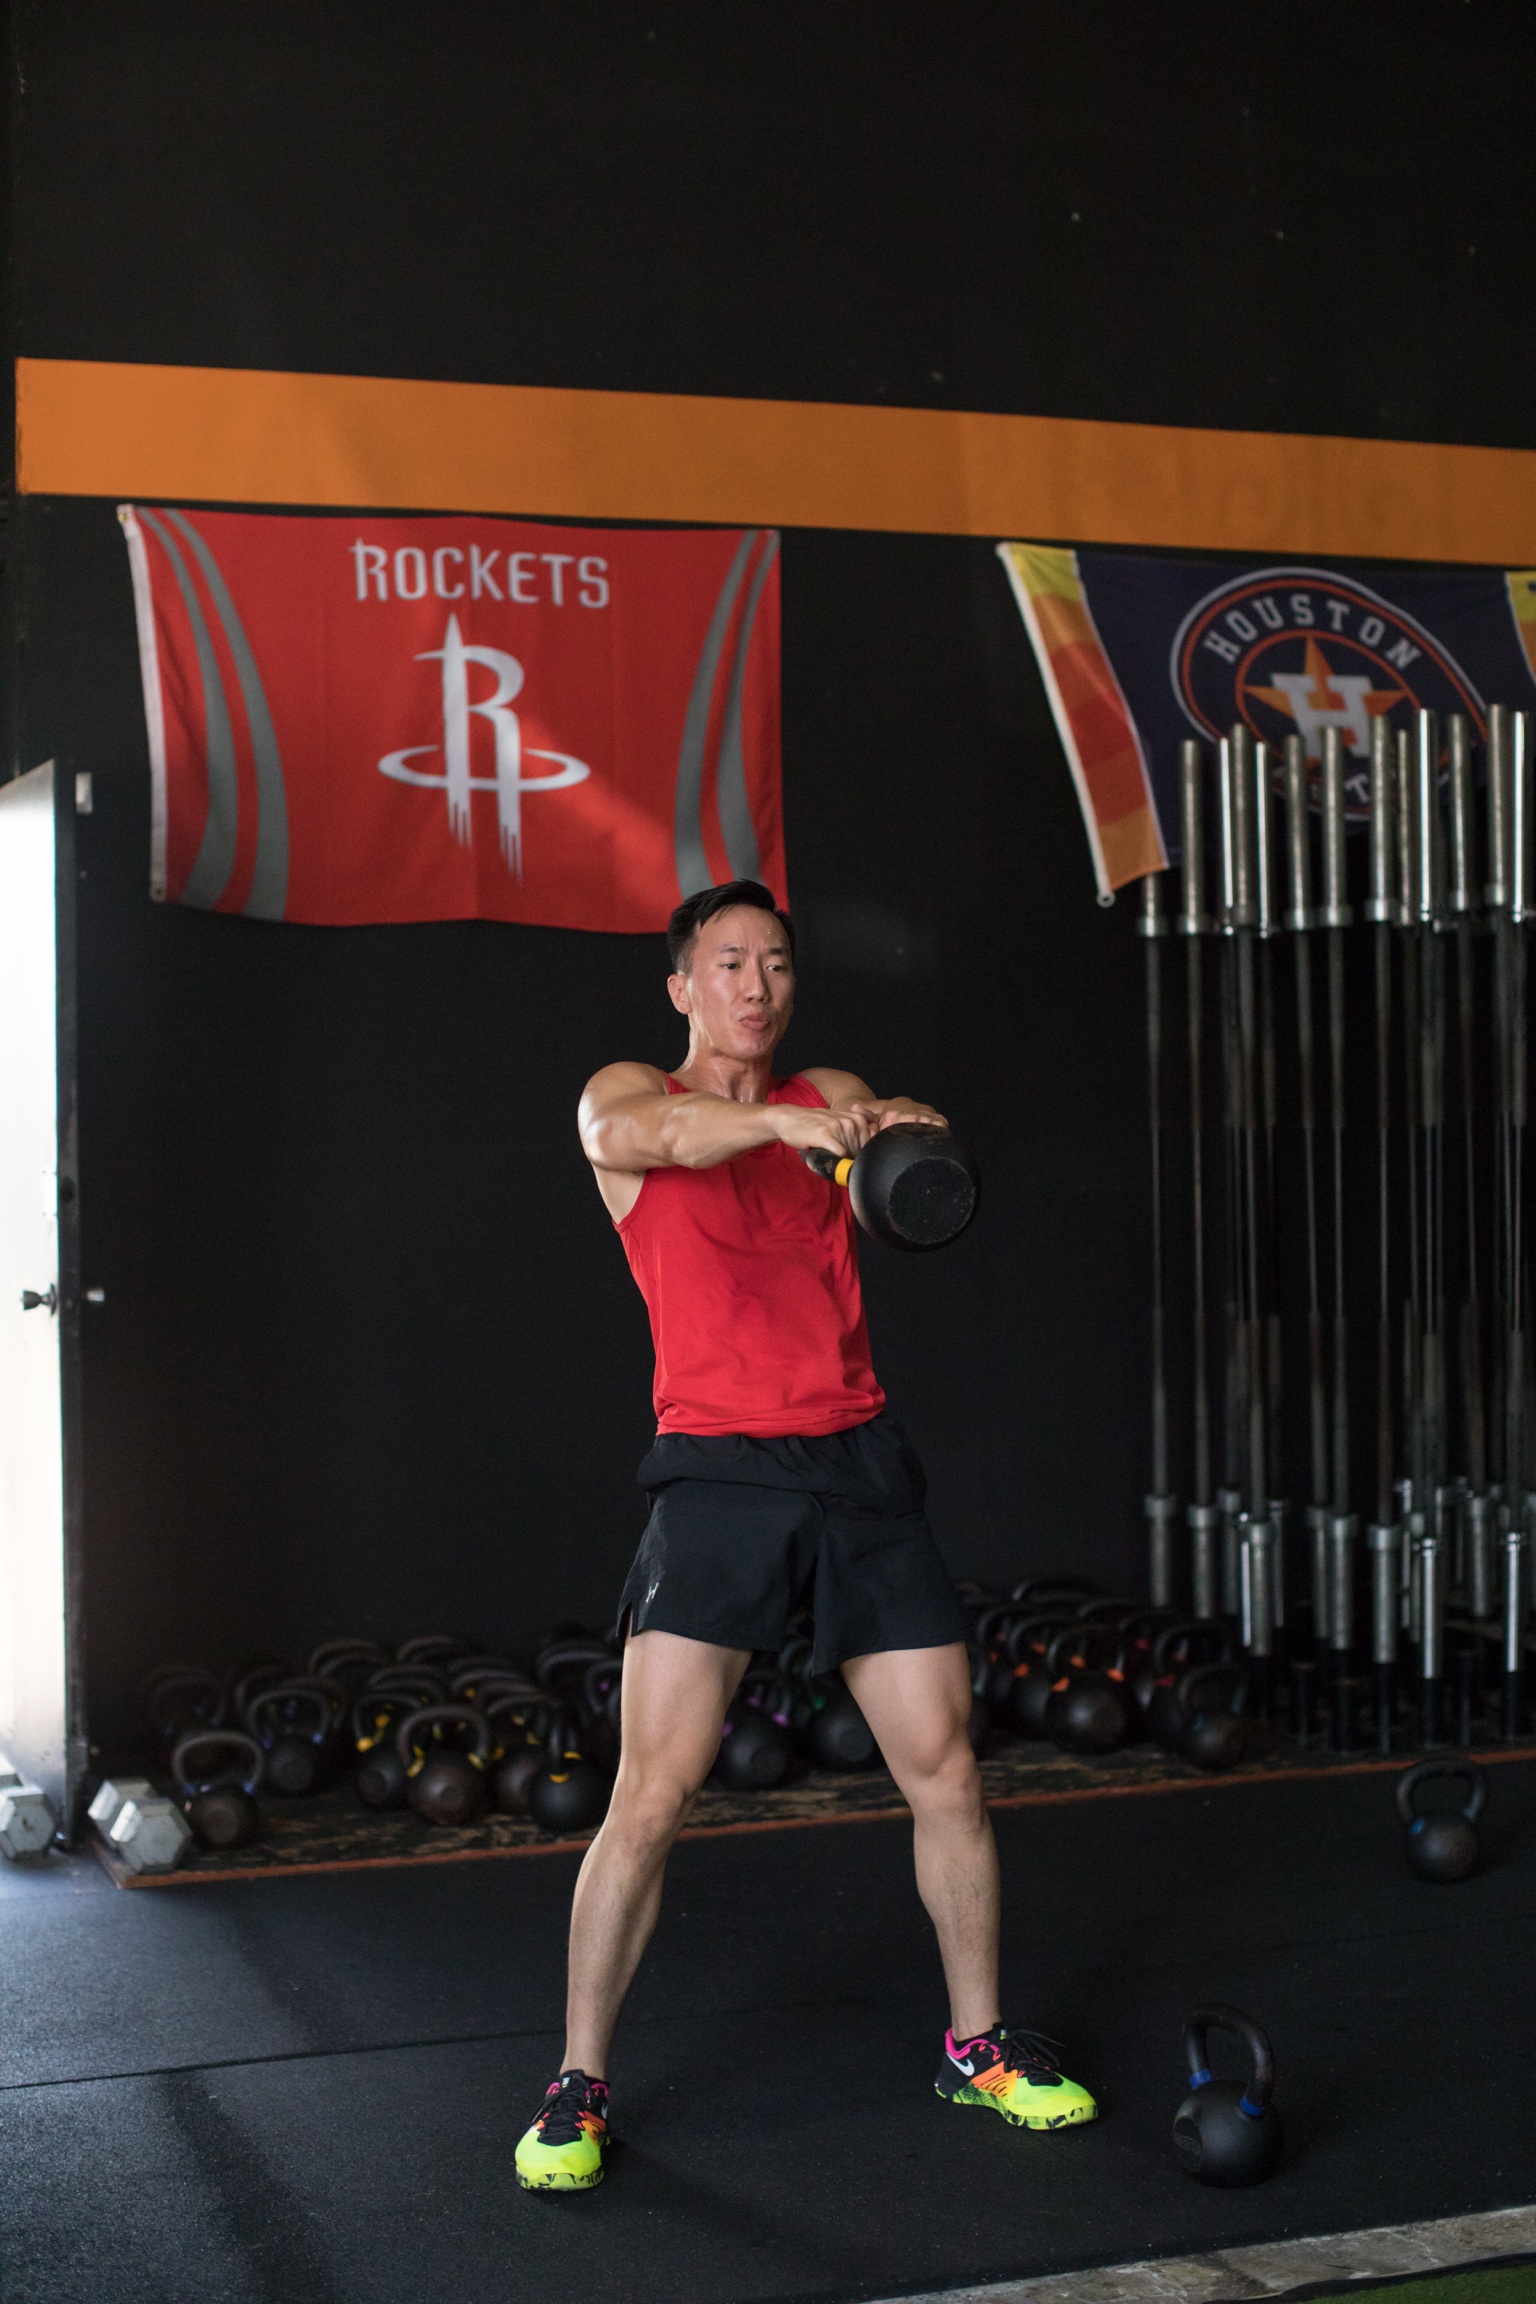  Duy is really serious with that kettlebell swing. 